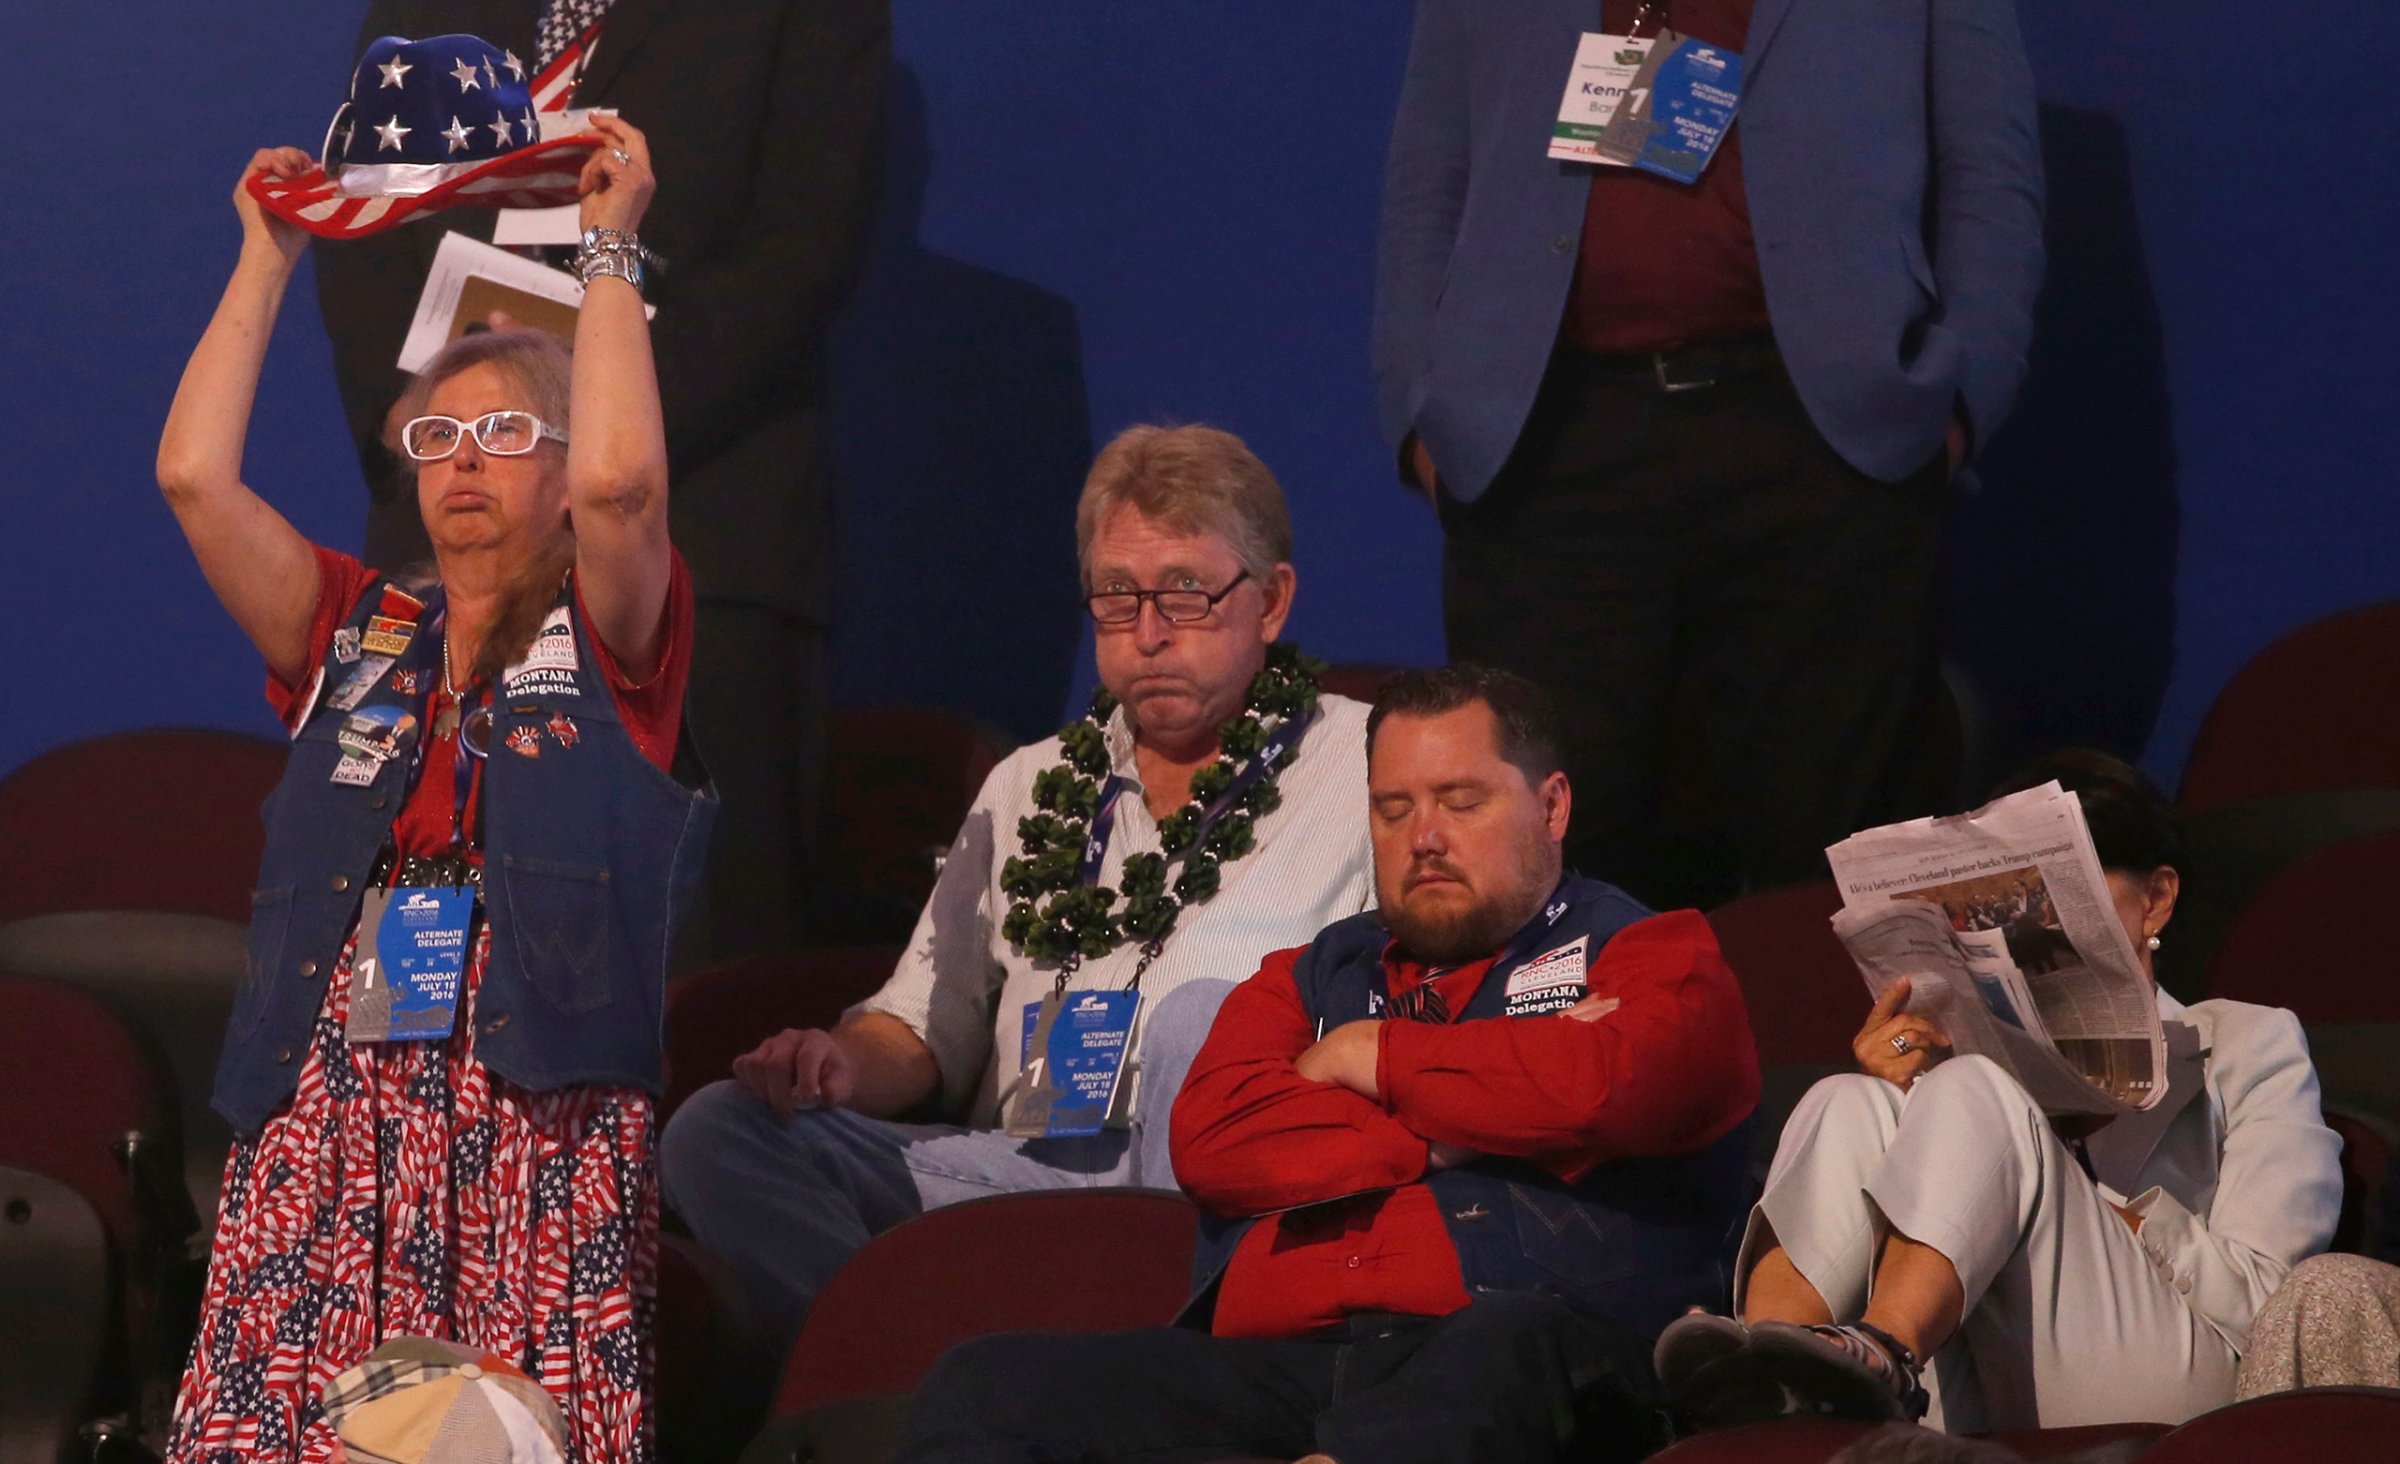 Alternate delegates and visitors watch with a variety of expression at the Republican National Convention in Cleveland, Ohio, on July 18, 2016.